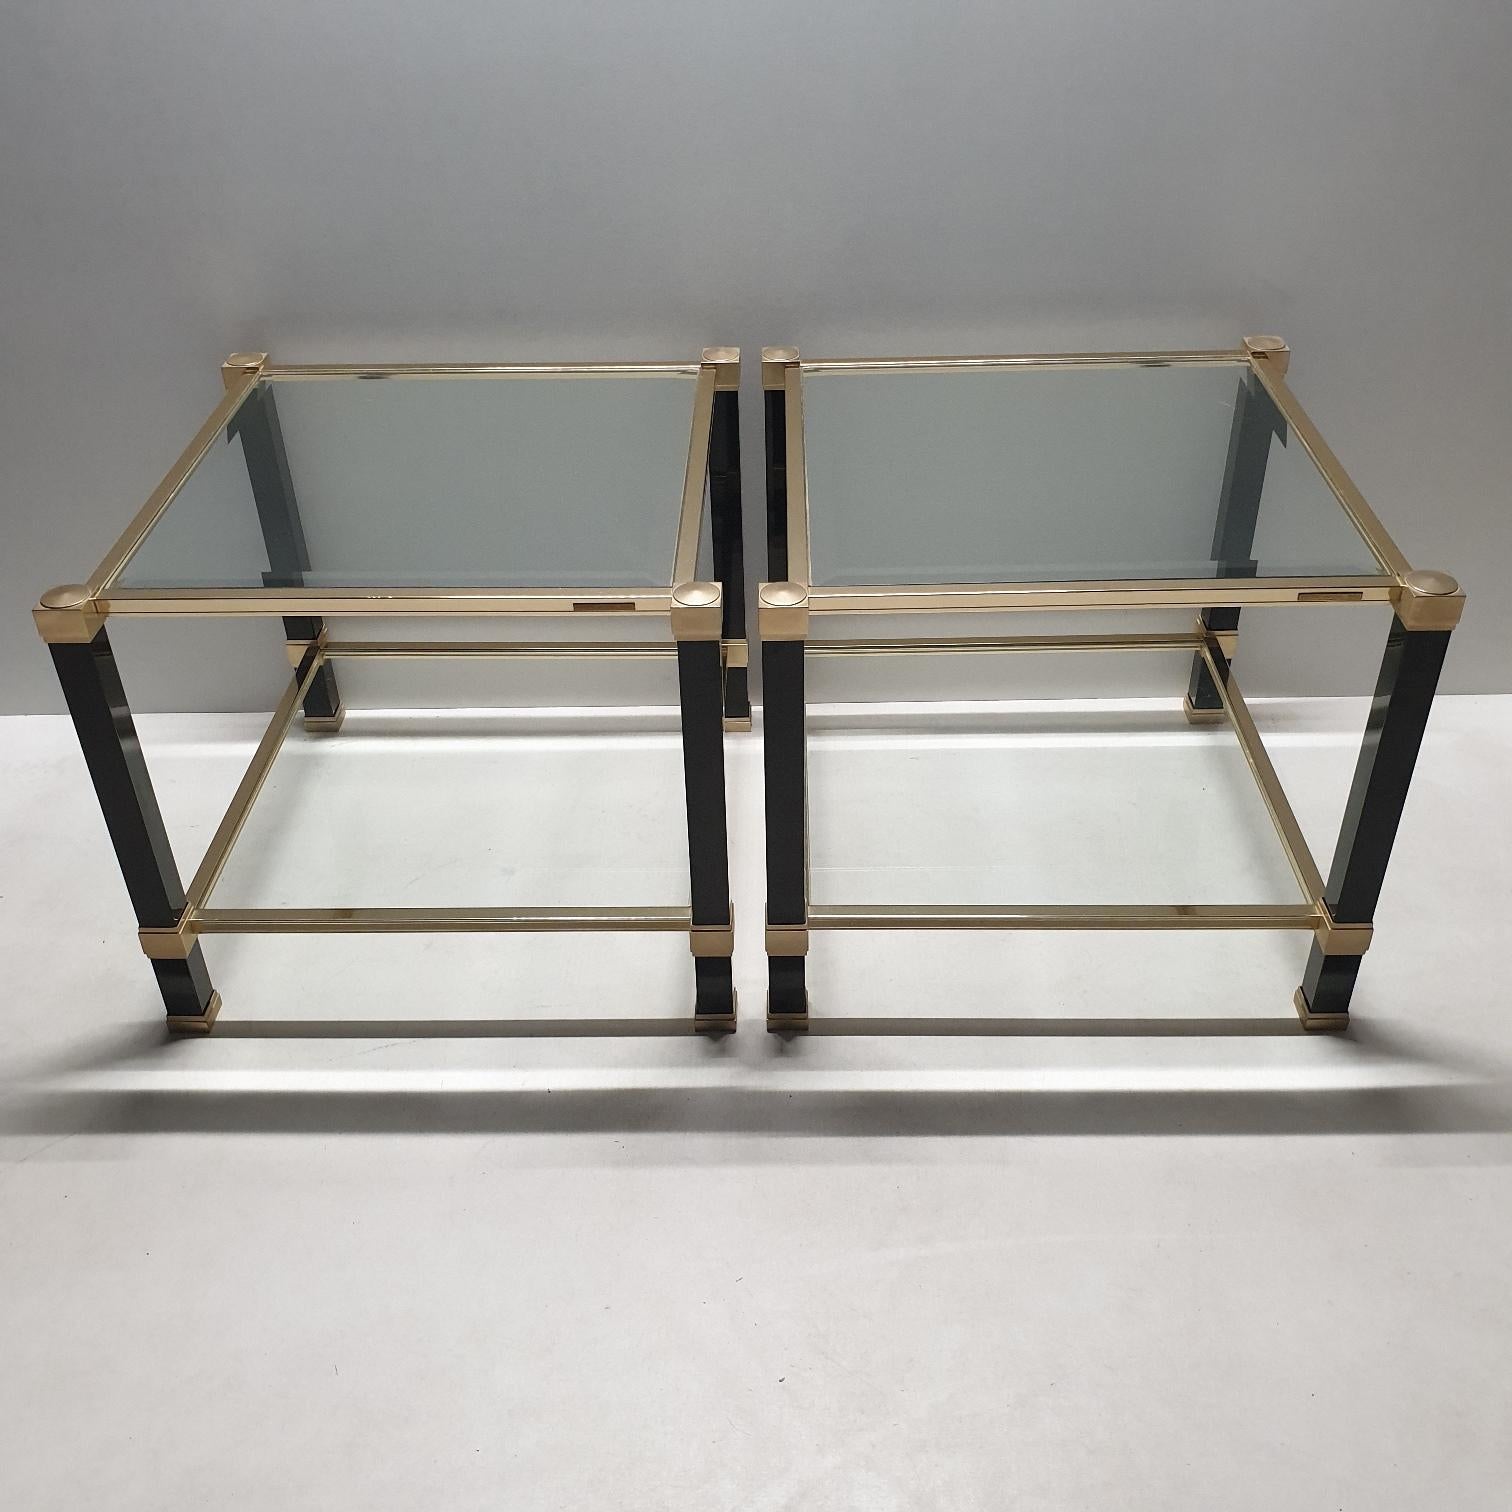 Pair of brass 2-tiers square site tables by Pierre Vandel, 1980s
with a two color brass.